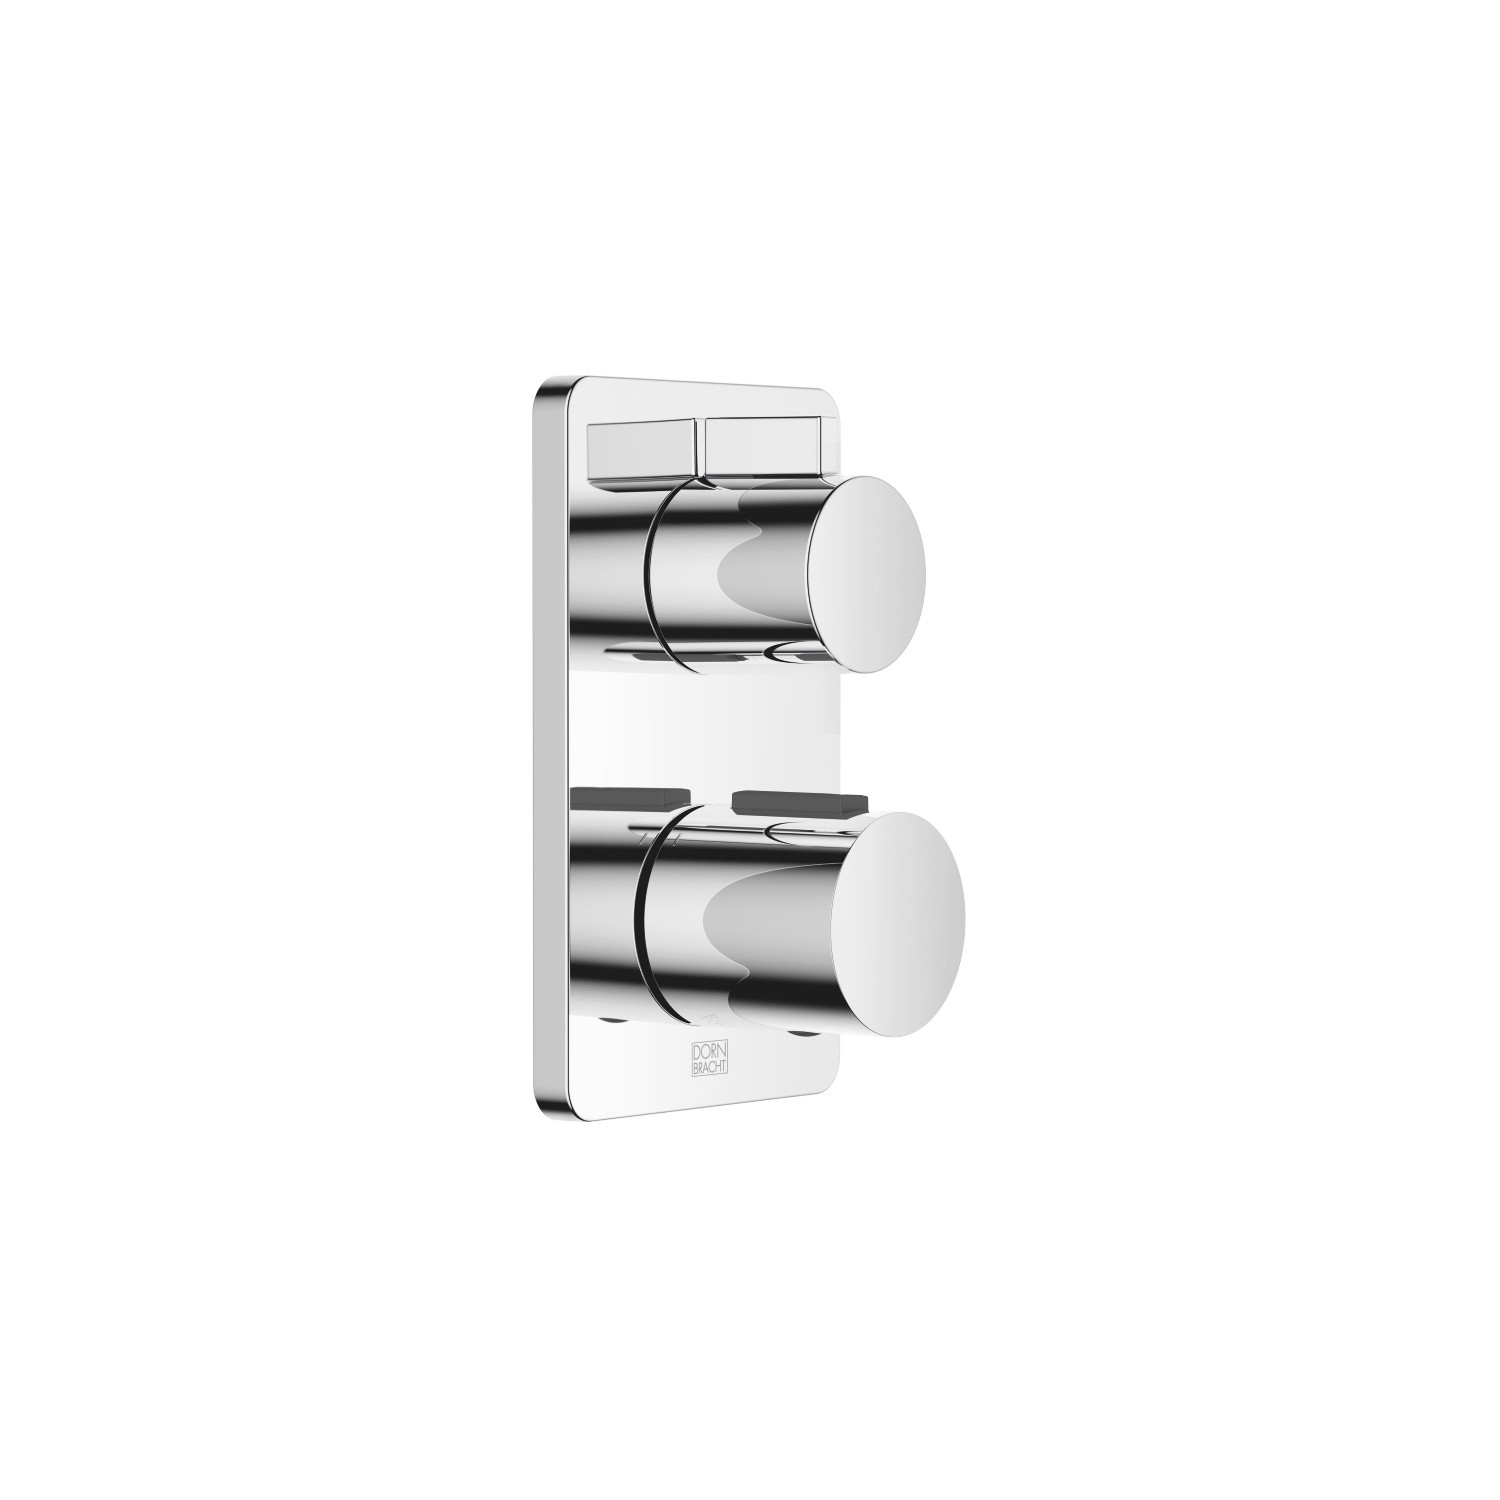 DORNBRACHT 36426710-0010 LULU WALL MOUNT CONCEALED THERMOSTATIC WITH TWO WAY VOLUME CONTROL